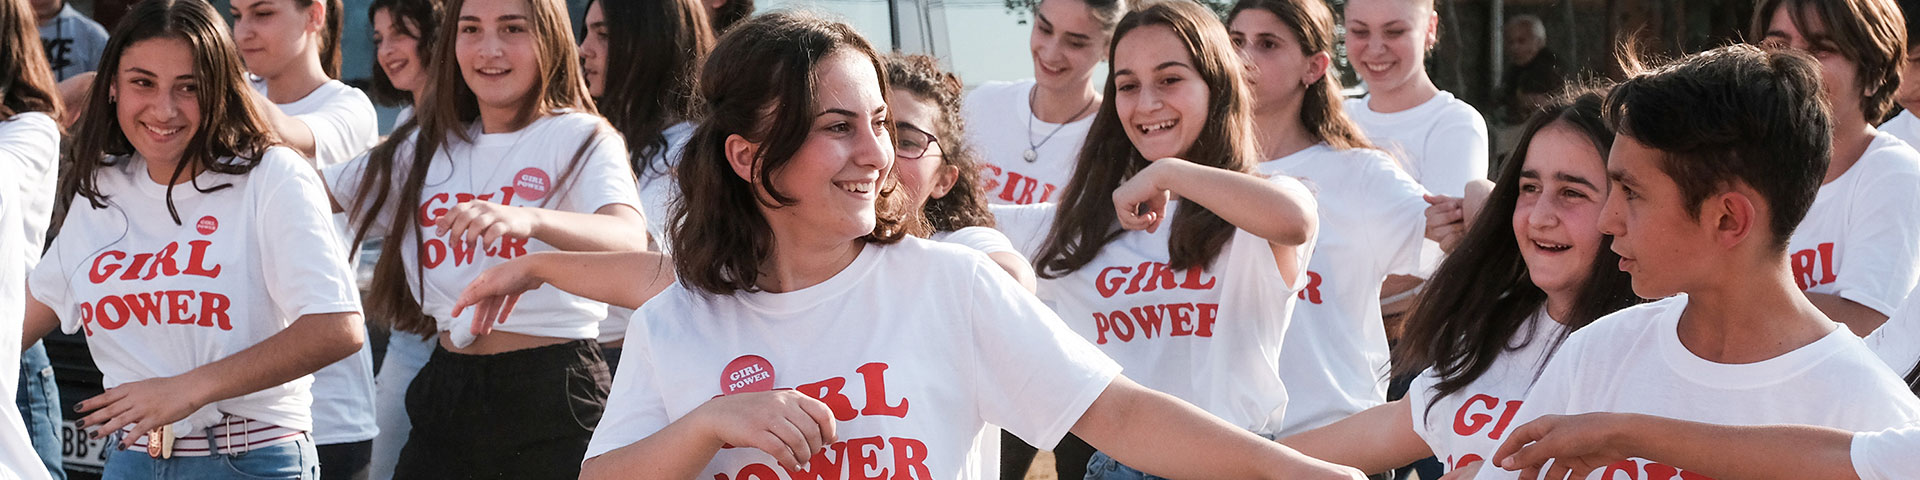 Young people wearing shirts with the print “Girl Power”